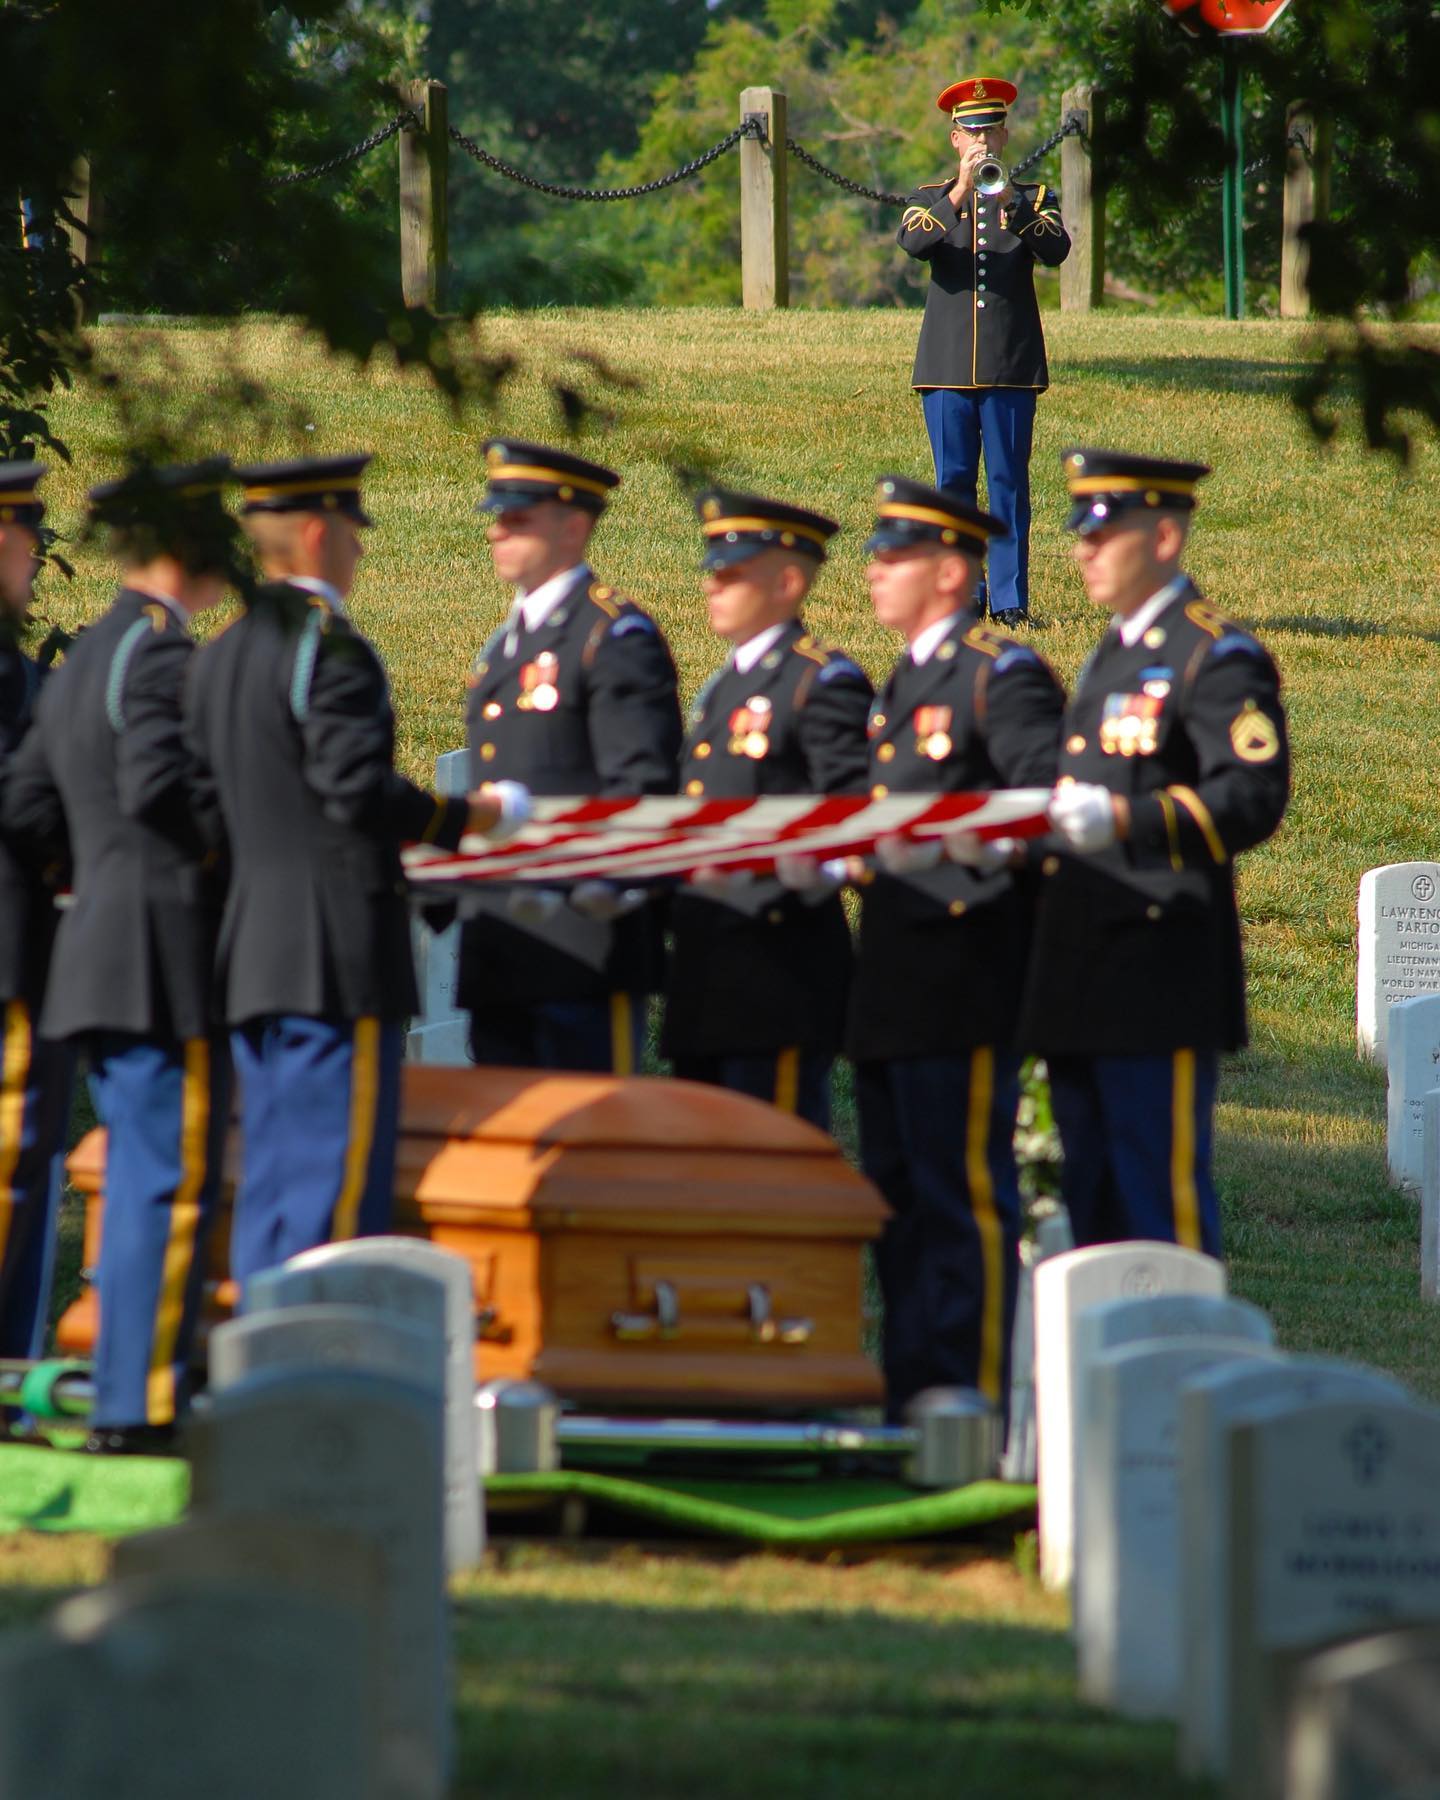 A @usarmyband bugler can be seen behind members of The Old Guard as they perform Taps in honor of a veteran.  Photograph captured by Arlington Media photographers.

There are several legends concerning the origin of "Taps". The most widely circulated one states that a Union Army infantry officer, whose name often is given as Captain Robert Ellicombe, first ordered "Taps" performed at the funeral of his son, a Confederate soldier killed during the Peninsula Campaign. 

This apocryphal story claims that Ellicombe found the tune in the pocket of his son's clothing and performed it to honor his memory, but there is no record of any man named Robert Ellicombe holding a commission as captain in the Army of the Potomac during the Peninsula Campaign.

Another, perhaps more historically verifiable, account of "Taps" first being used in the context of a military funeral involves John C. Tidball, a Union artillery captain who during a break in fighting ordered the tune sounded for a deceased soldier in lieu of the more traditional—and much less discreet—three volley tribute. Army Col. James A. Moss, in an Officer's Manual initially published in 1911, reports the following:

During the Peninsula Campaign in 1862, a soldier of Tidball's Battery A of the 2nd Artillery was buried at a time when the battery occupied an advanced position concealed in the woods. It was not safe to fire the customary three volleys over the grave, on account of the proximity of the enemy, and it occurred to Capt. Tidball that the sounding of Taps would be the most appropriate ceremony that could be substituted.

While not necessarily addressing the origin of "Taps", this does represent the first recorded instance of "Taps" being sounded as part of a military funeral. Until then, while the tune had meant that the soldiers' day of work was finished, it had little to none of the connotation or overtone of death, with which it so often is associated today.